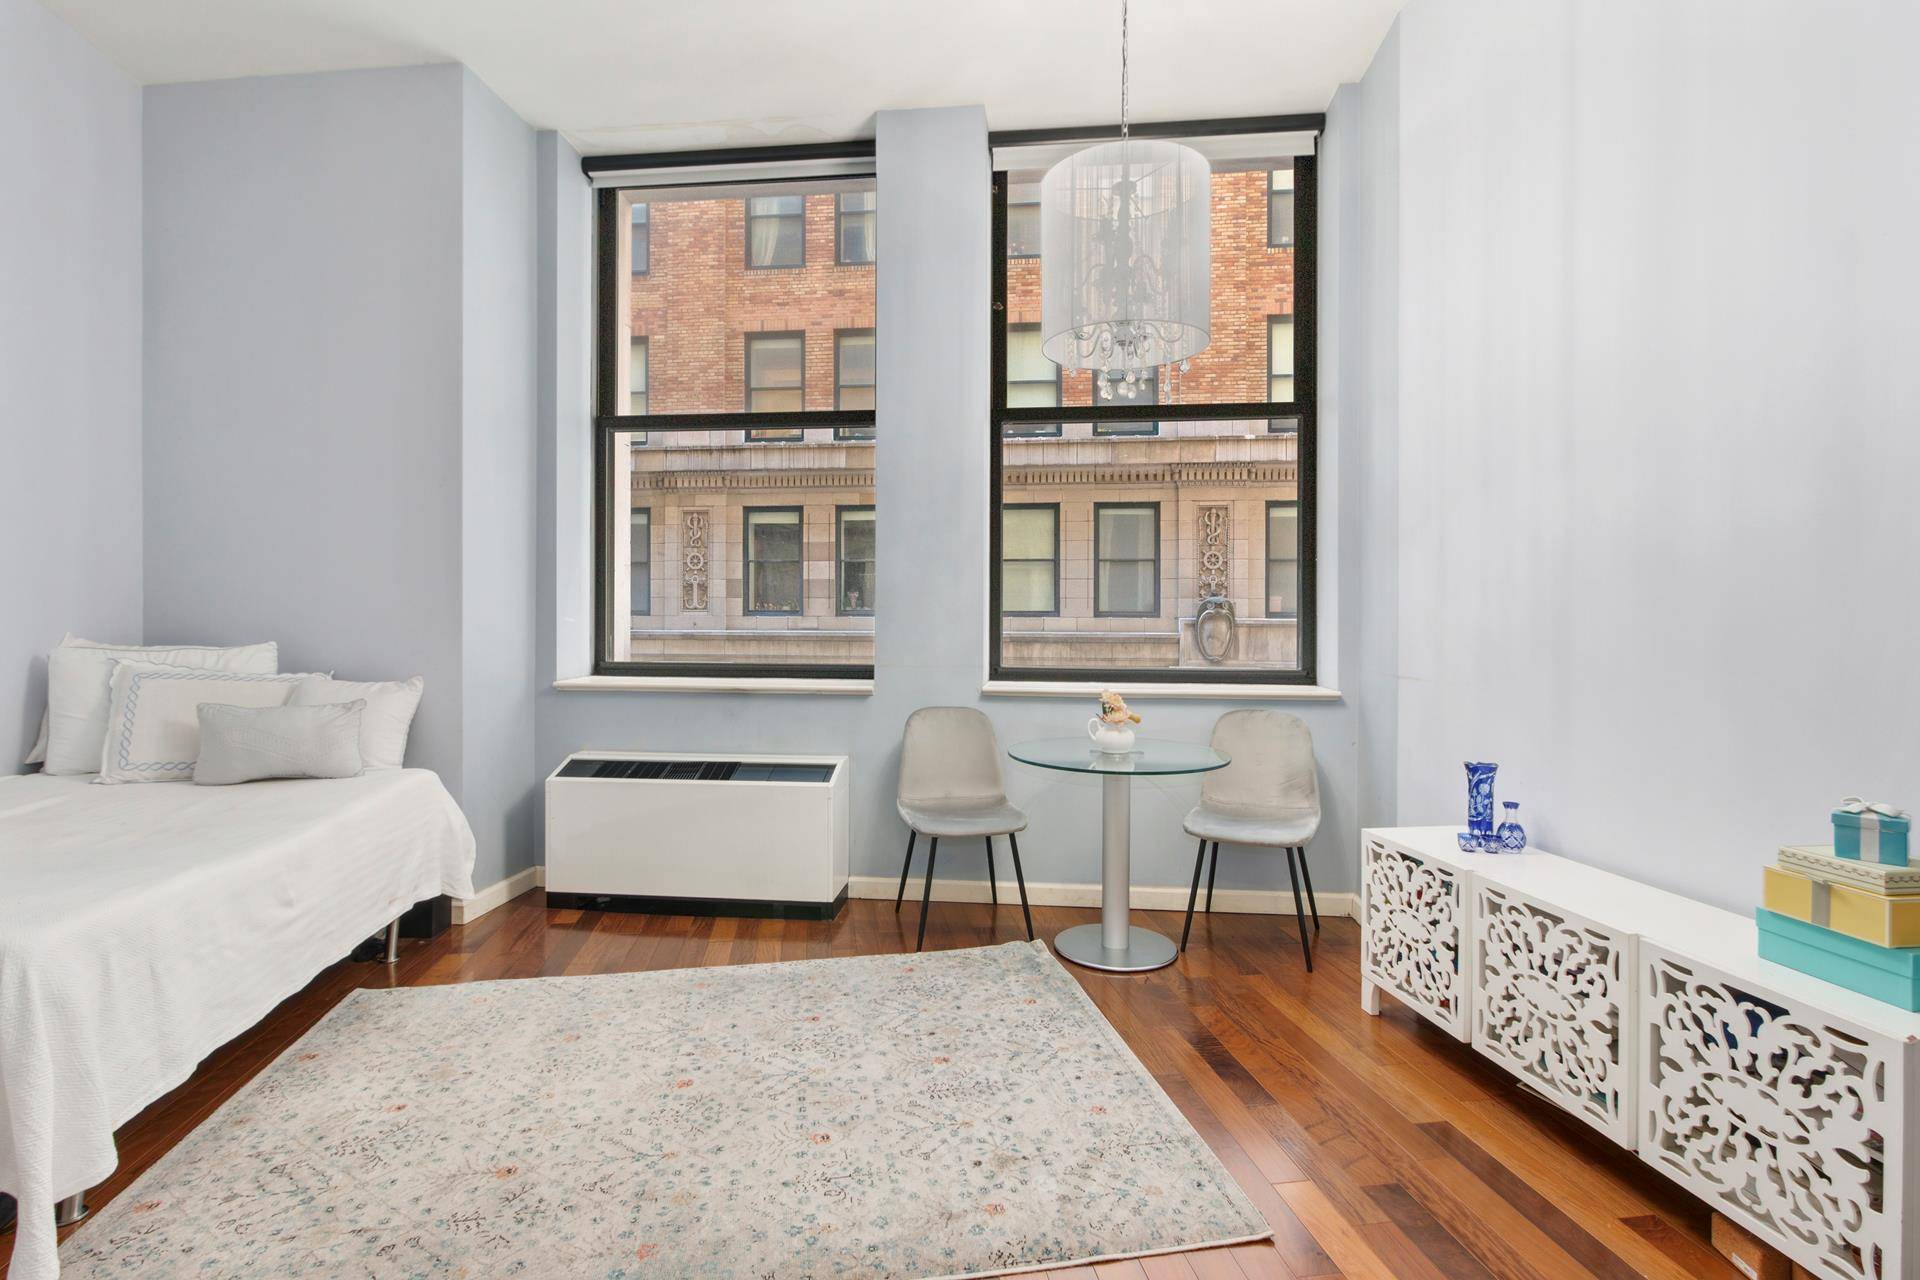 Welcome to this stunning studio apartment 307 at the Cocoa Exchange, an iconic full service condominium reminiscent of the Flatiron Building and rich in history.